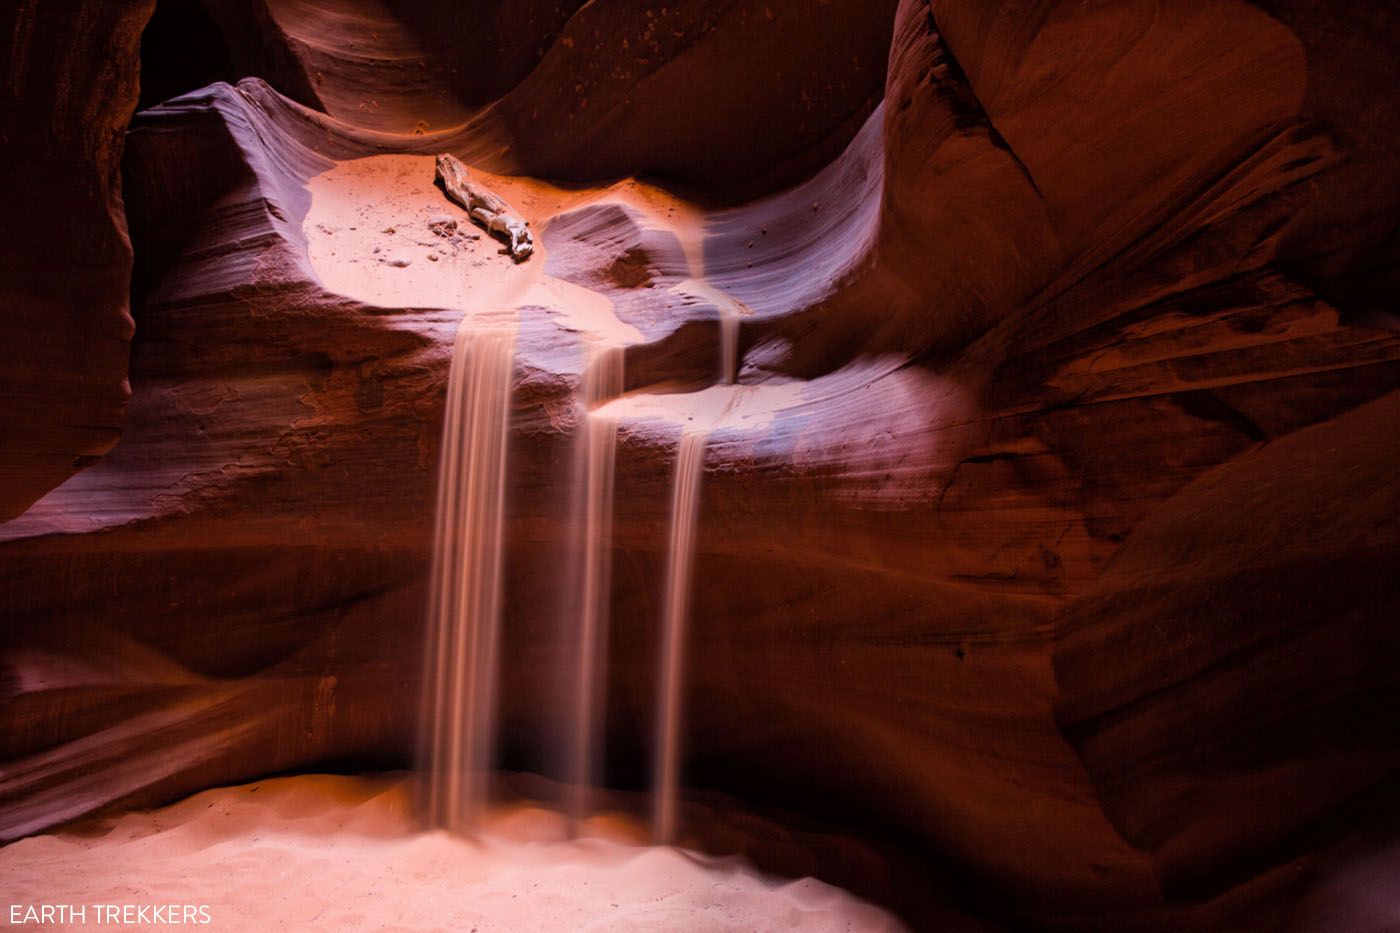 How to Visit Antelope Canyon